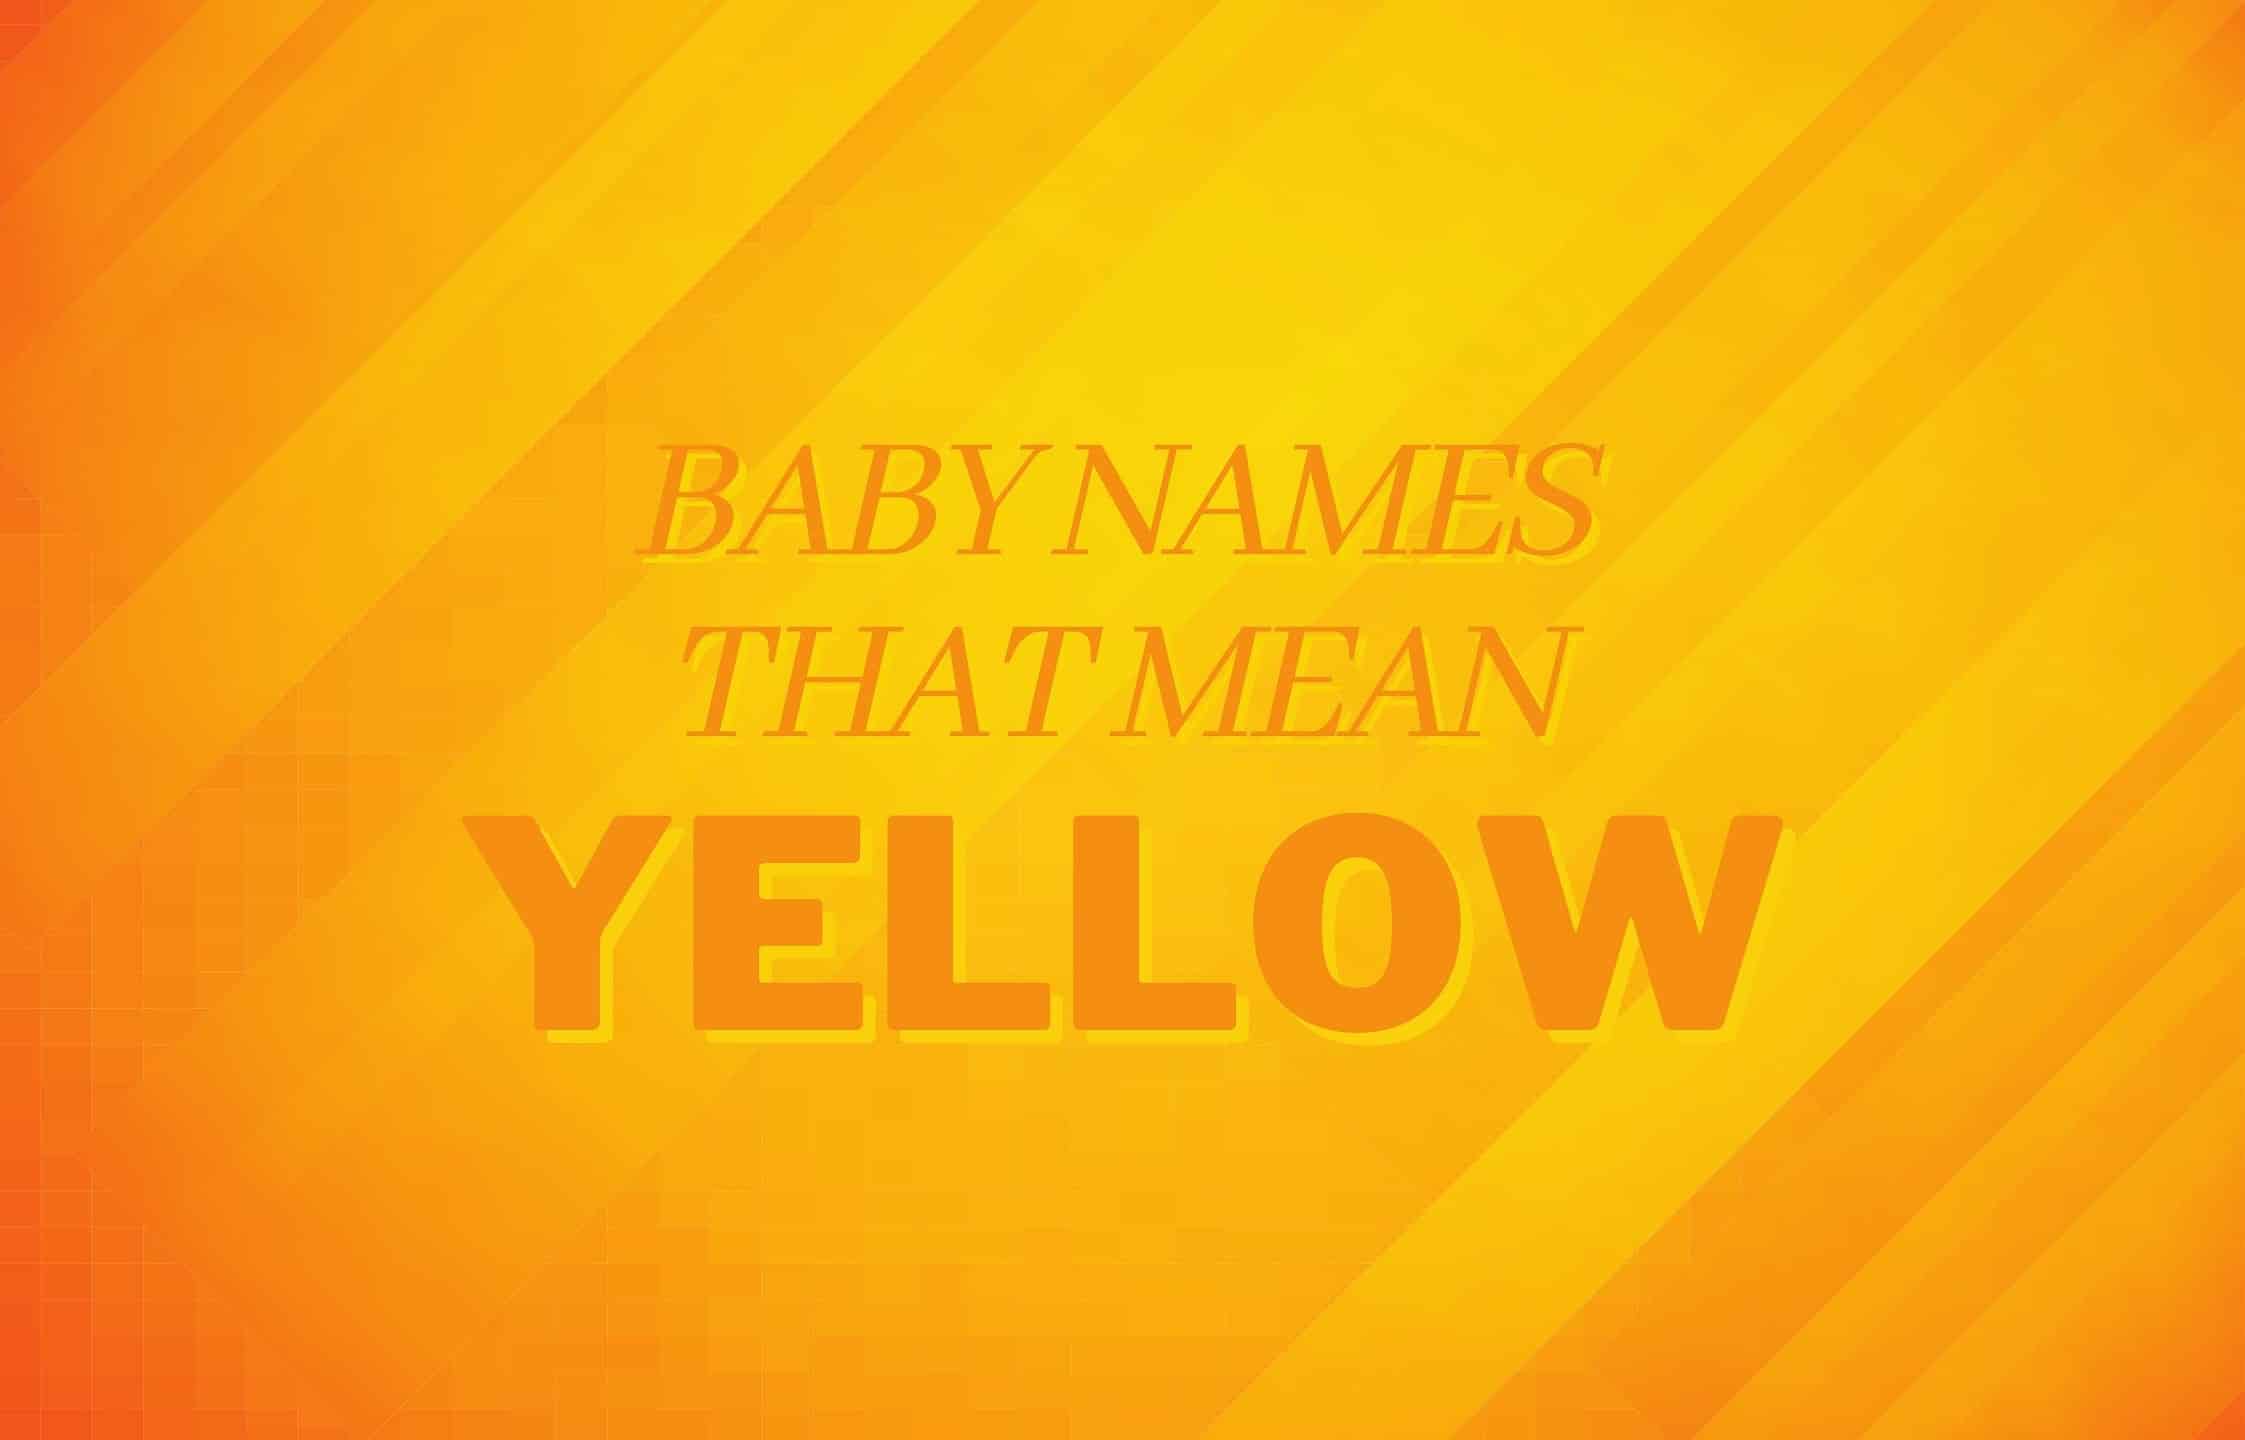 Baby names that mean yellow